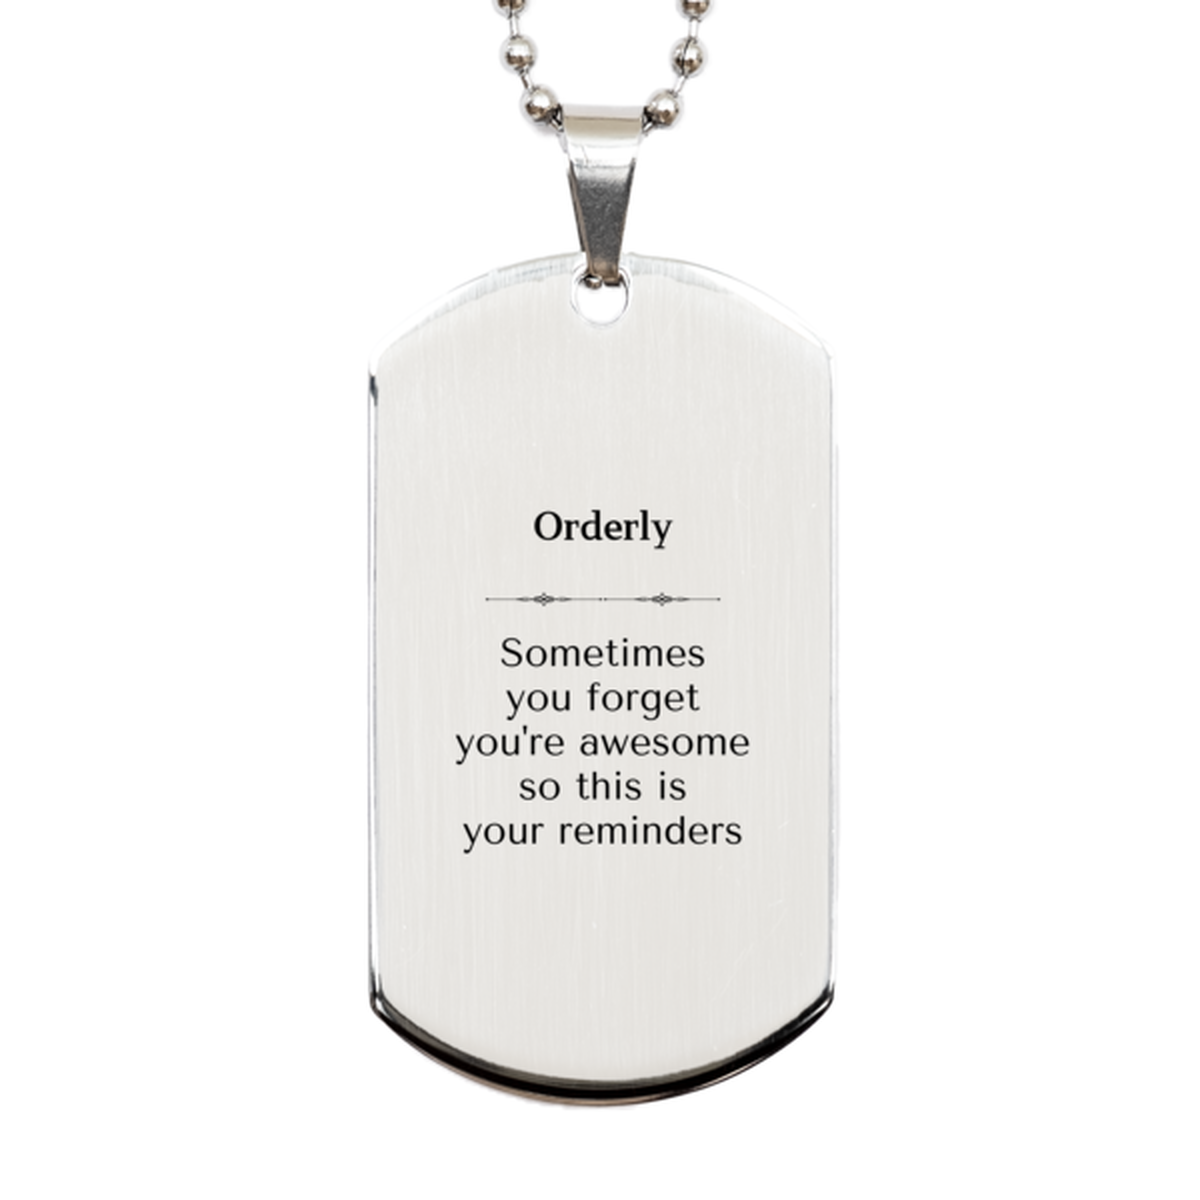 Sentimental Orderly Silver Dog Tag, Orderly Sometimes you forget you're awesome so this is your reminders, Graduation Christmas Birthday Gifts for Orderly, Men, Women, Coworkers